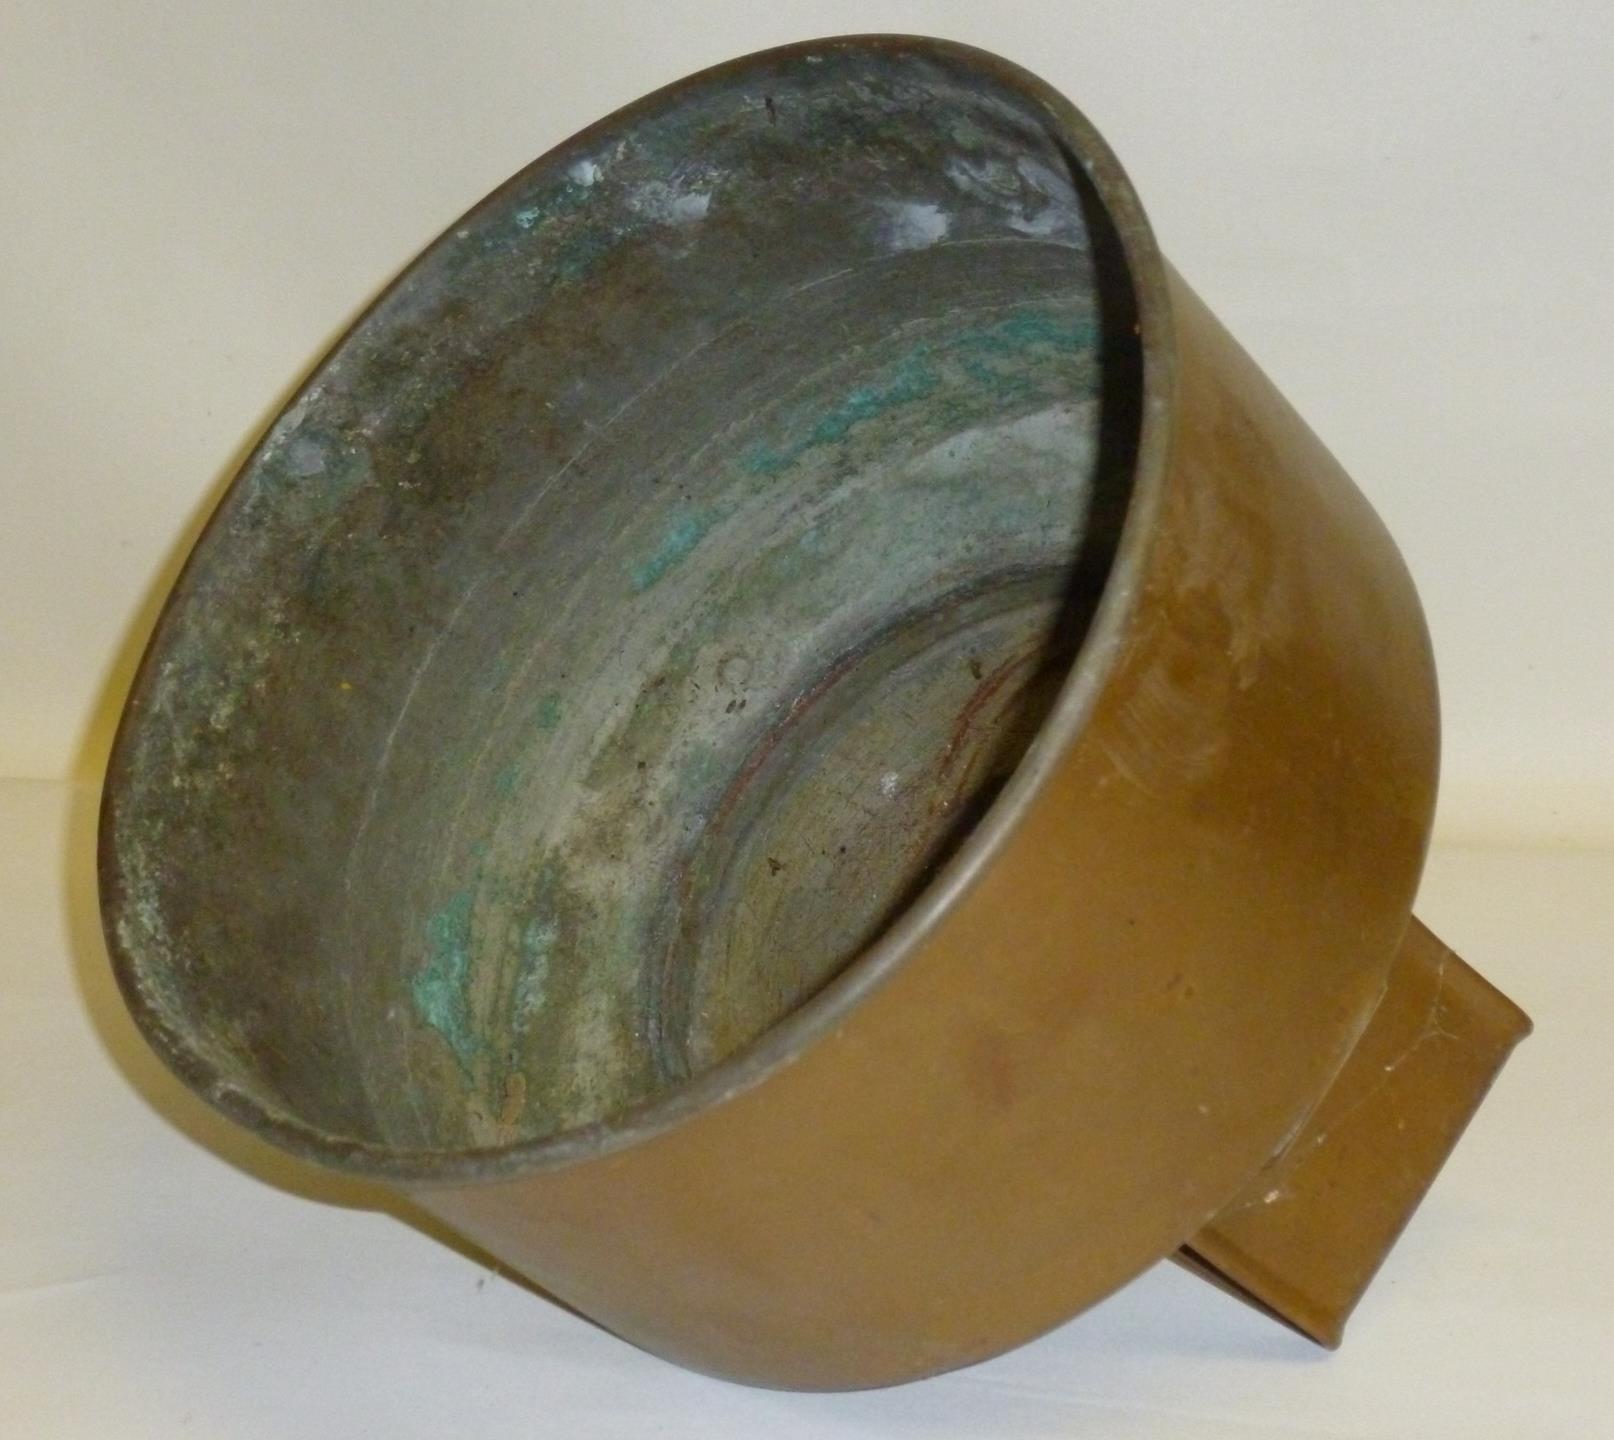 LEITH CREAMERY CO. COPPER CHURN (h: 48 cm INC. HANDLE EXTENDED) ALONG WITH A COPPER BREWERY ULLAGE - Image 4 of 5